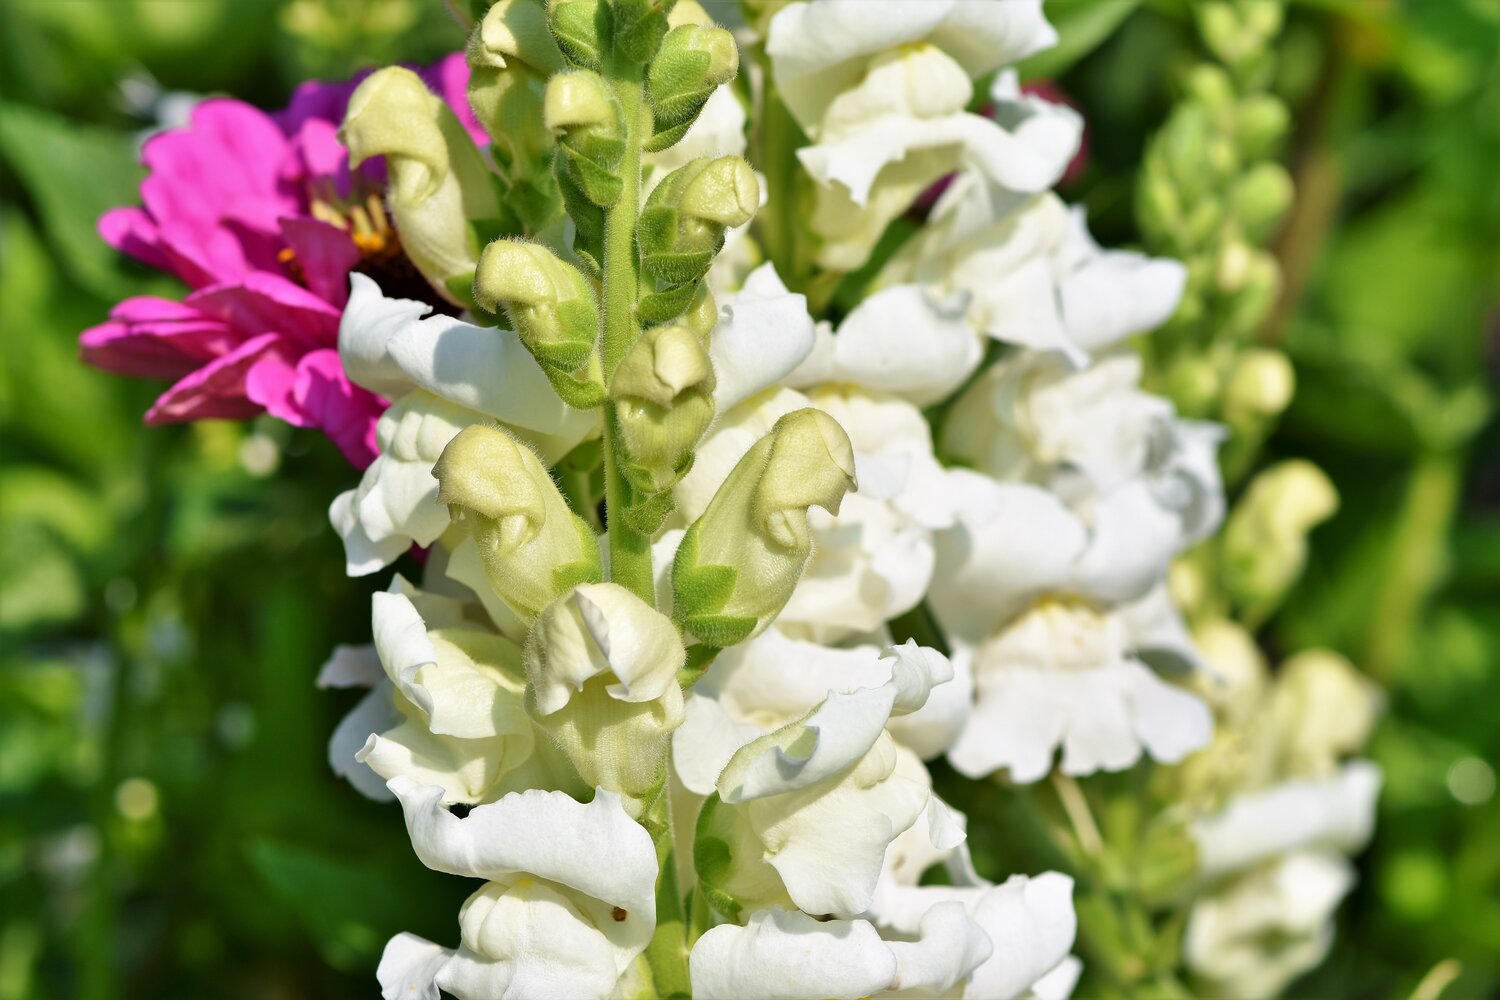 Snapdragons are known to be hearty and are a good choice if you are looking for flowers on your porch.